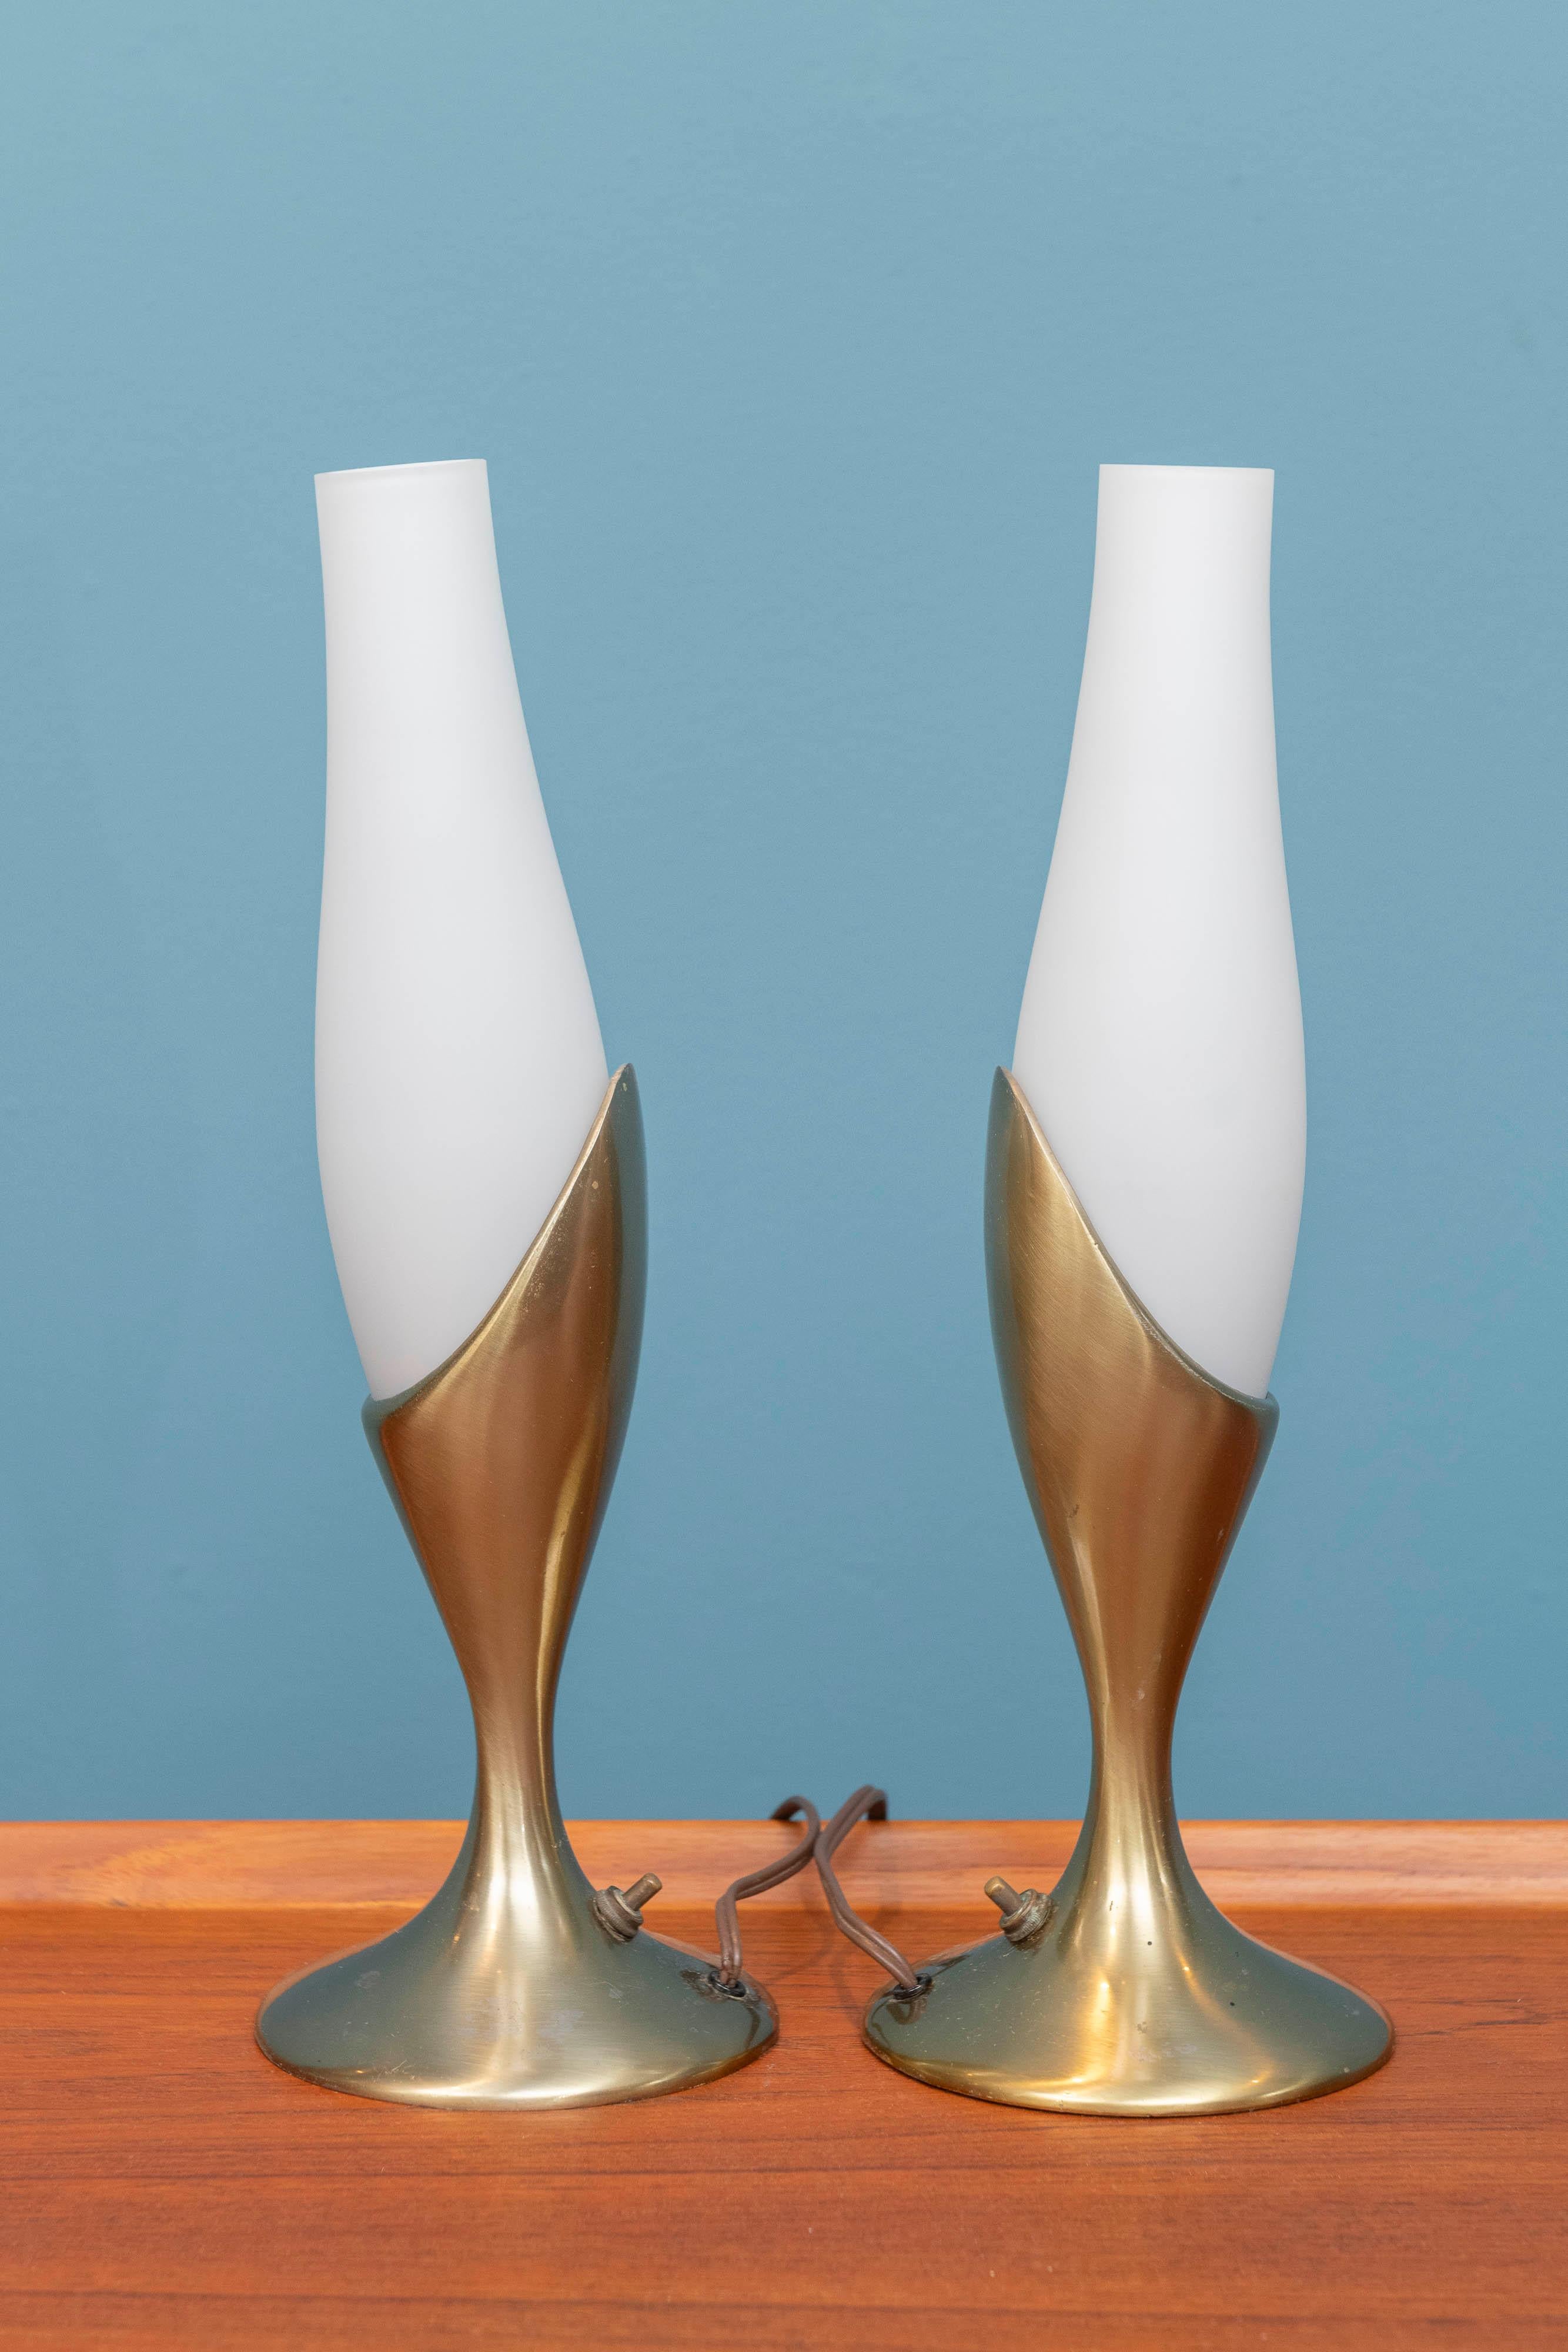 Pair of Laurel Lamp Company table or bedside lamps, U.S.A. Brass plated bases with Swedish blown glass tulip form opaque shades. Having base mounted switches that work as they should, showing age and use appropriate wear.